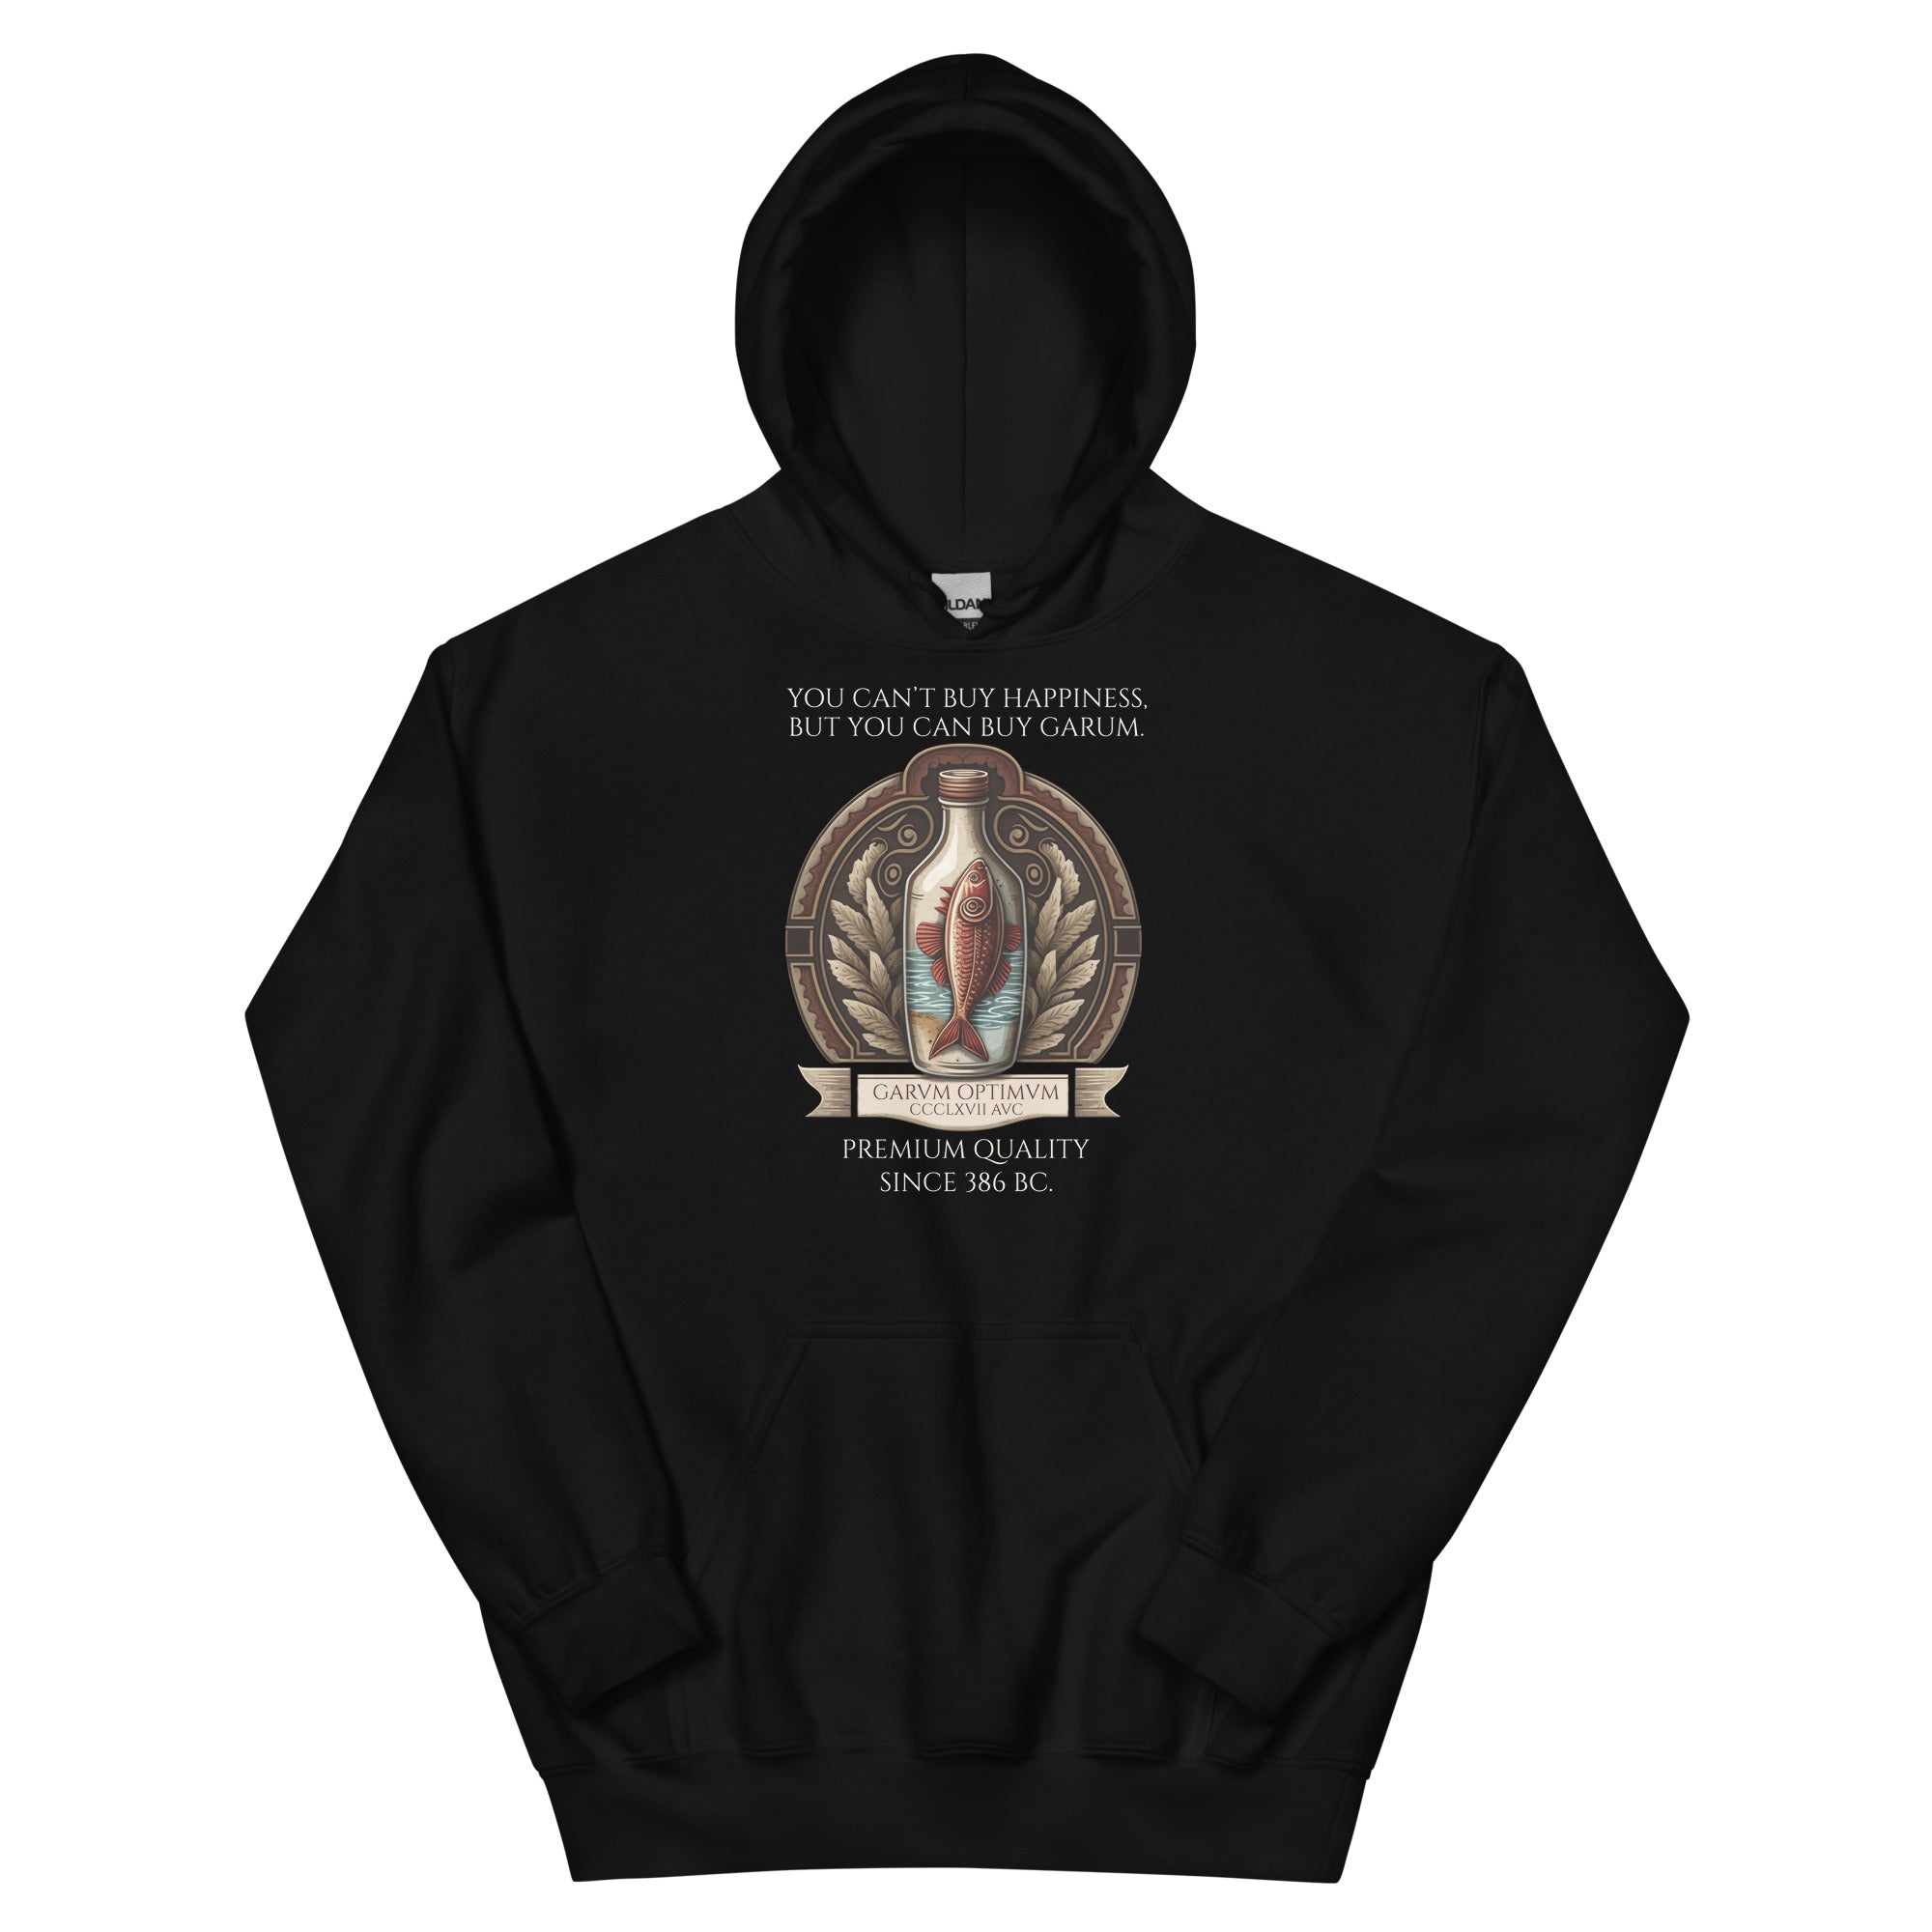 You Can Not Buy Happiness, But You Can Buy Garum - Ancient Rome Unisex Hoodie